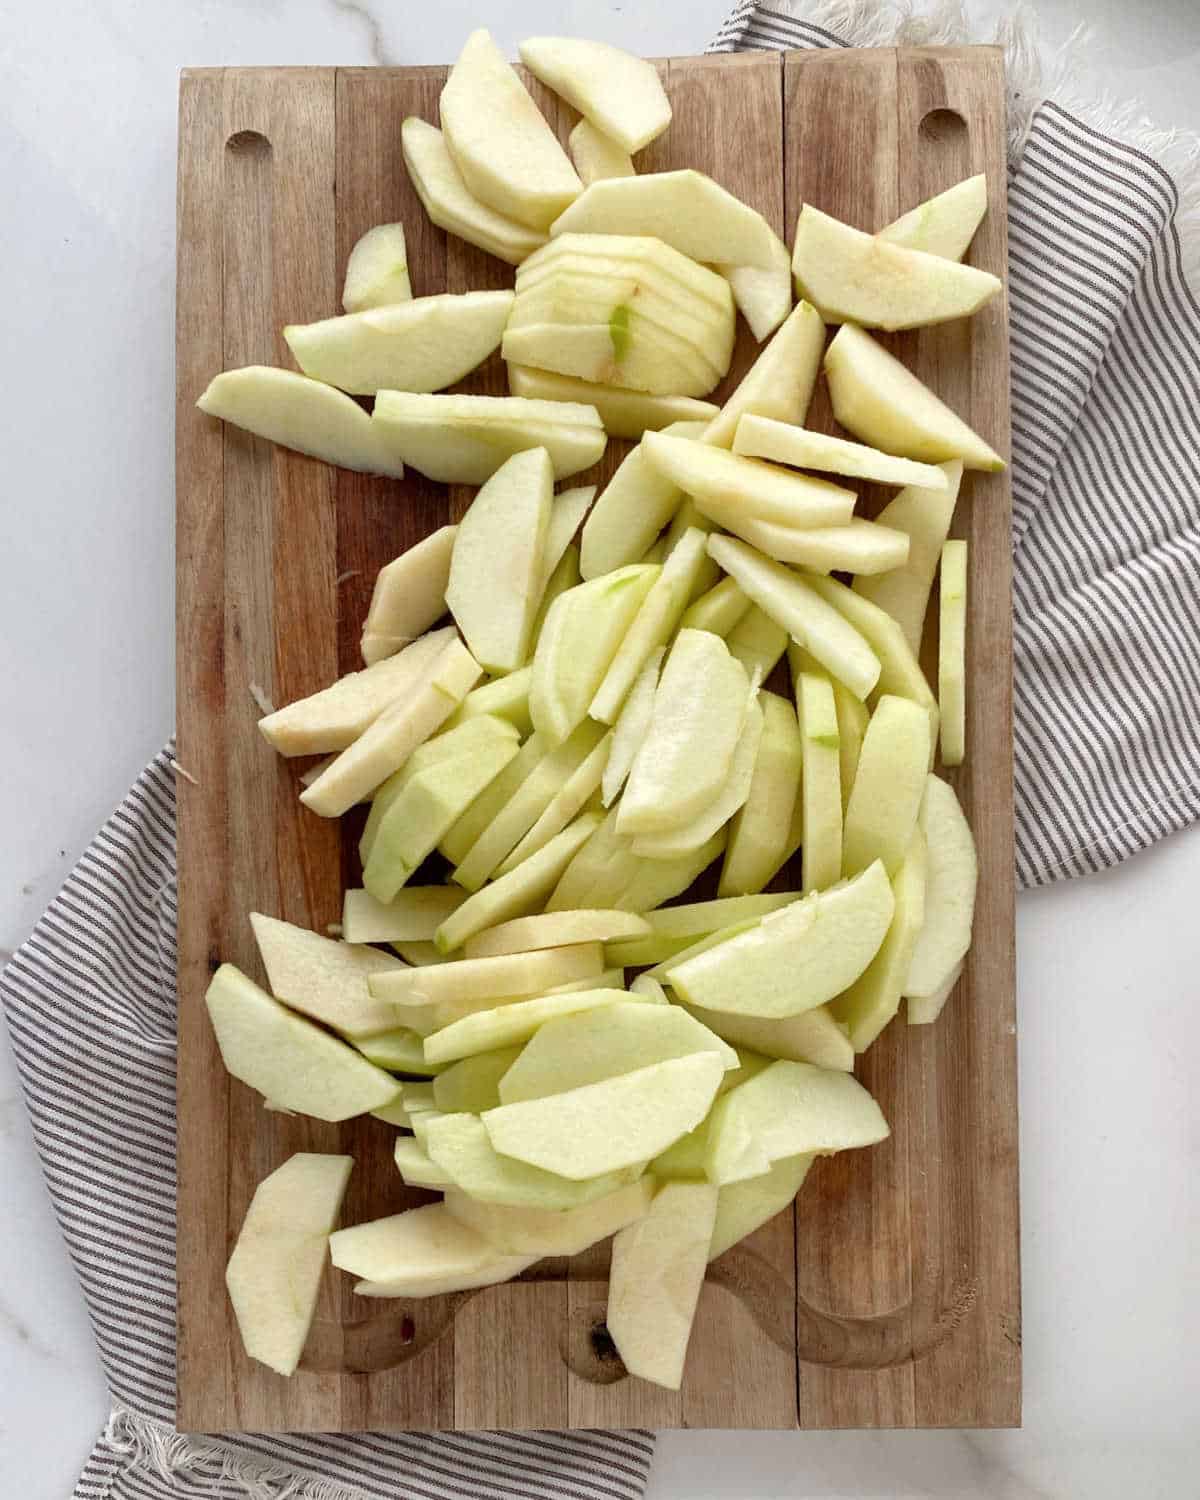 Apple slices on a wooden board over a striped cloth on a white marble surface. View from above.